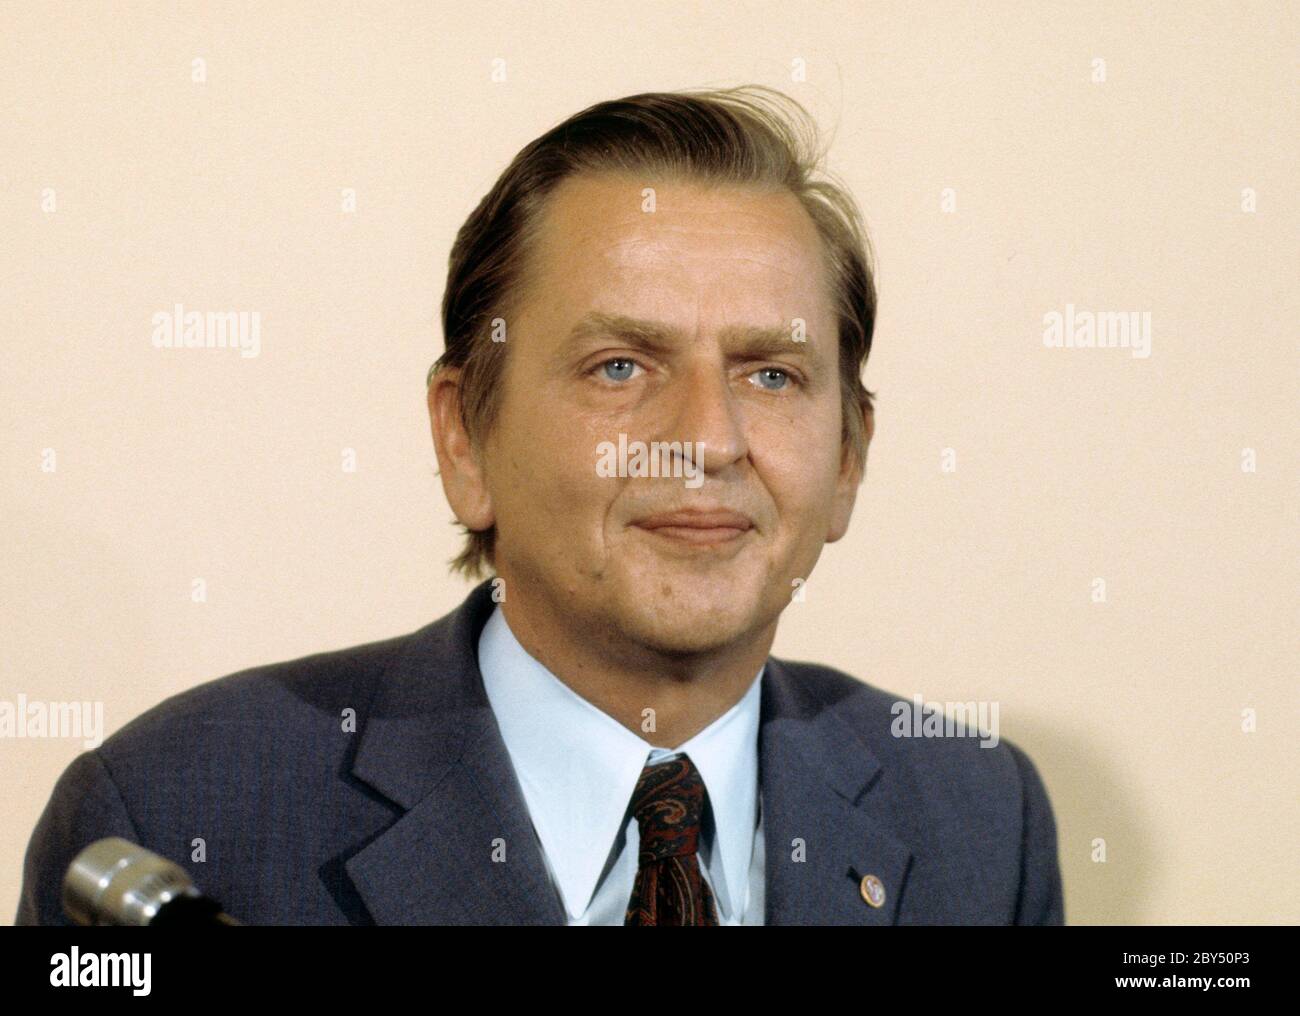 Olof Palme. Swedish social democratic politican and prime minister. Born october 14 1927. Murdered february 28 1985. Pictured here in the 1970s Stock Photo